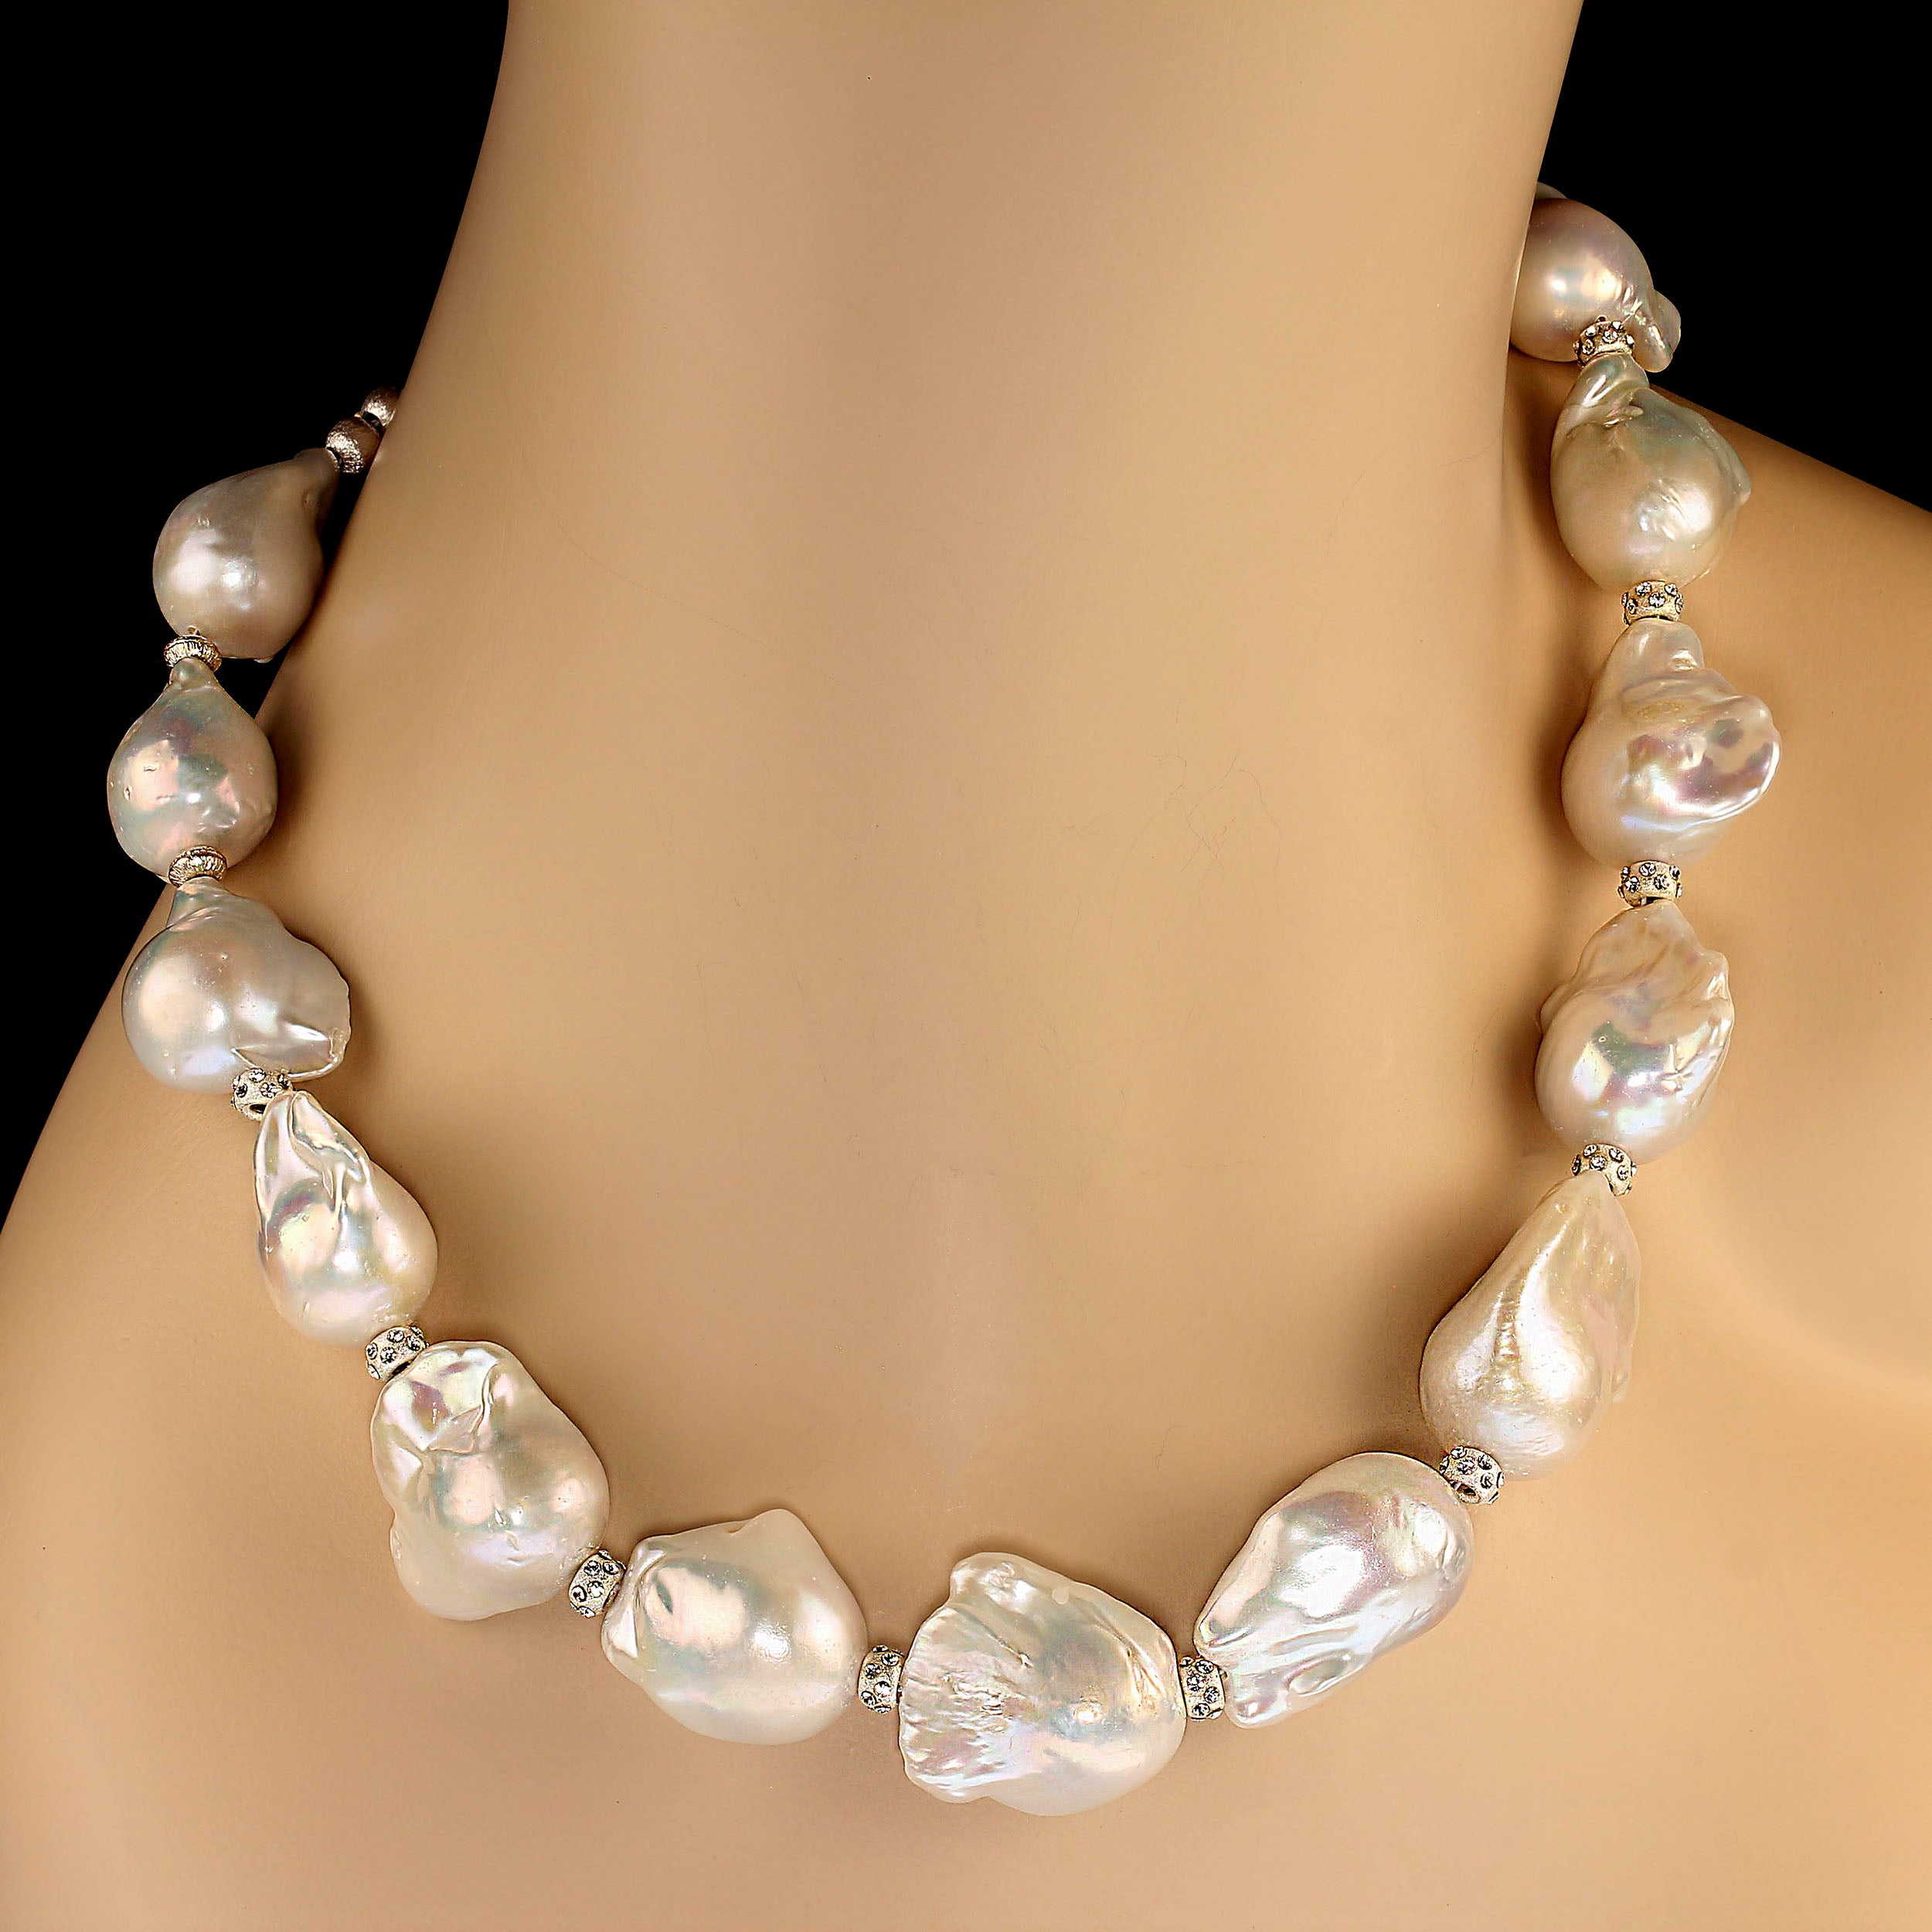 AJD 19 Inch Giant White Baroque Pearl Necklace with Sparkling Crystal Accents